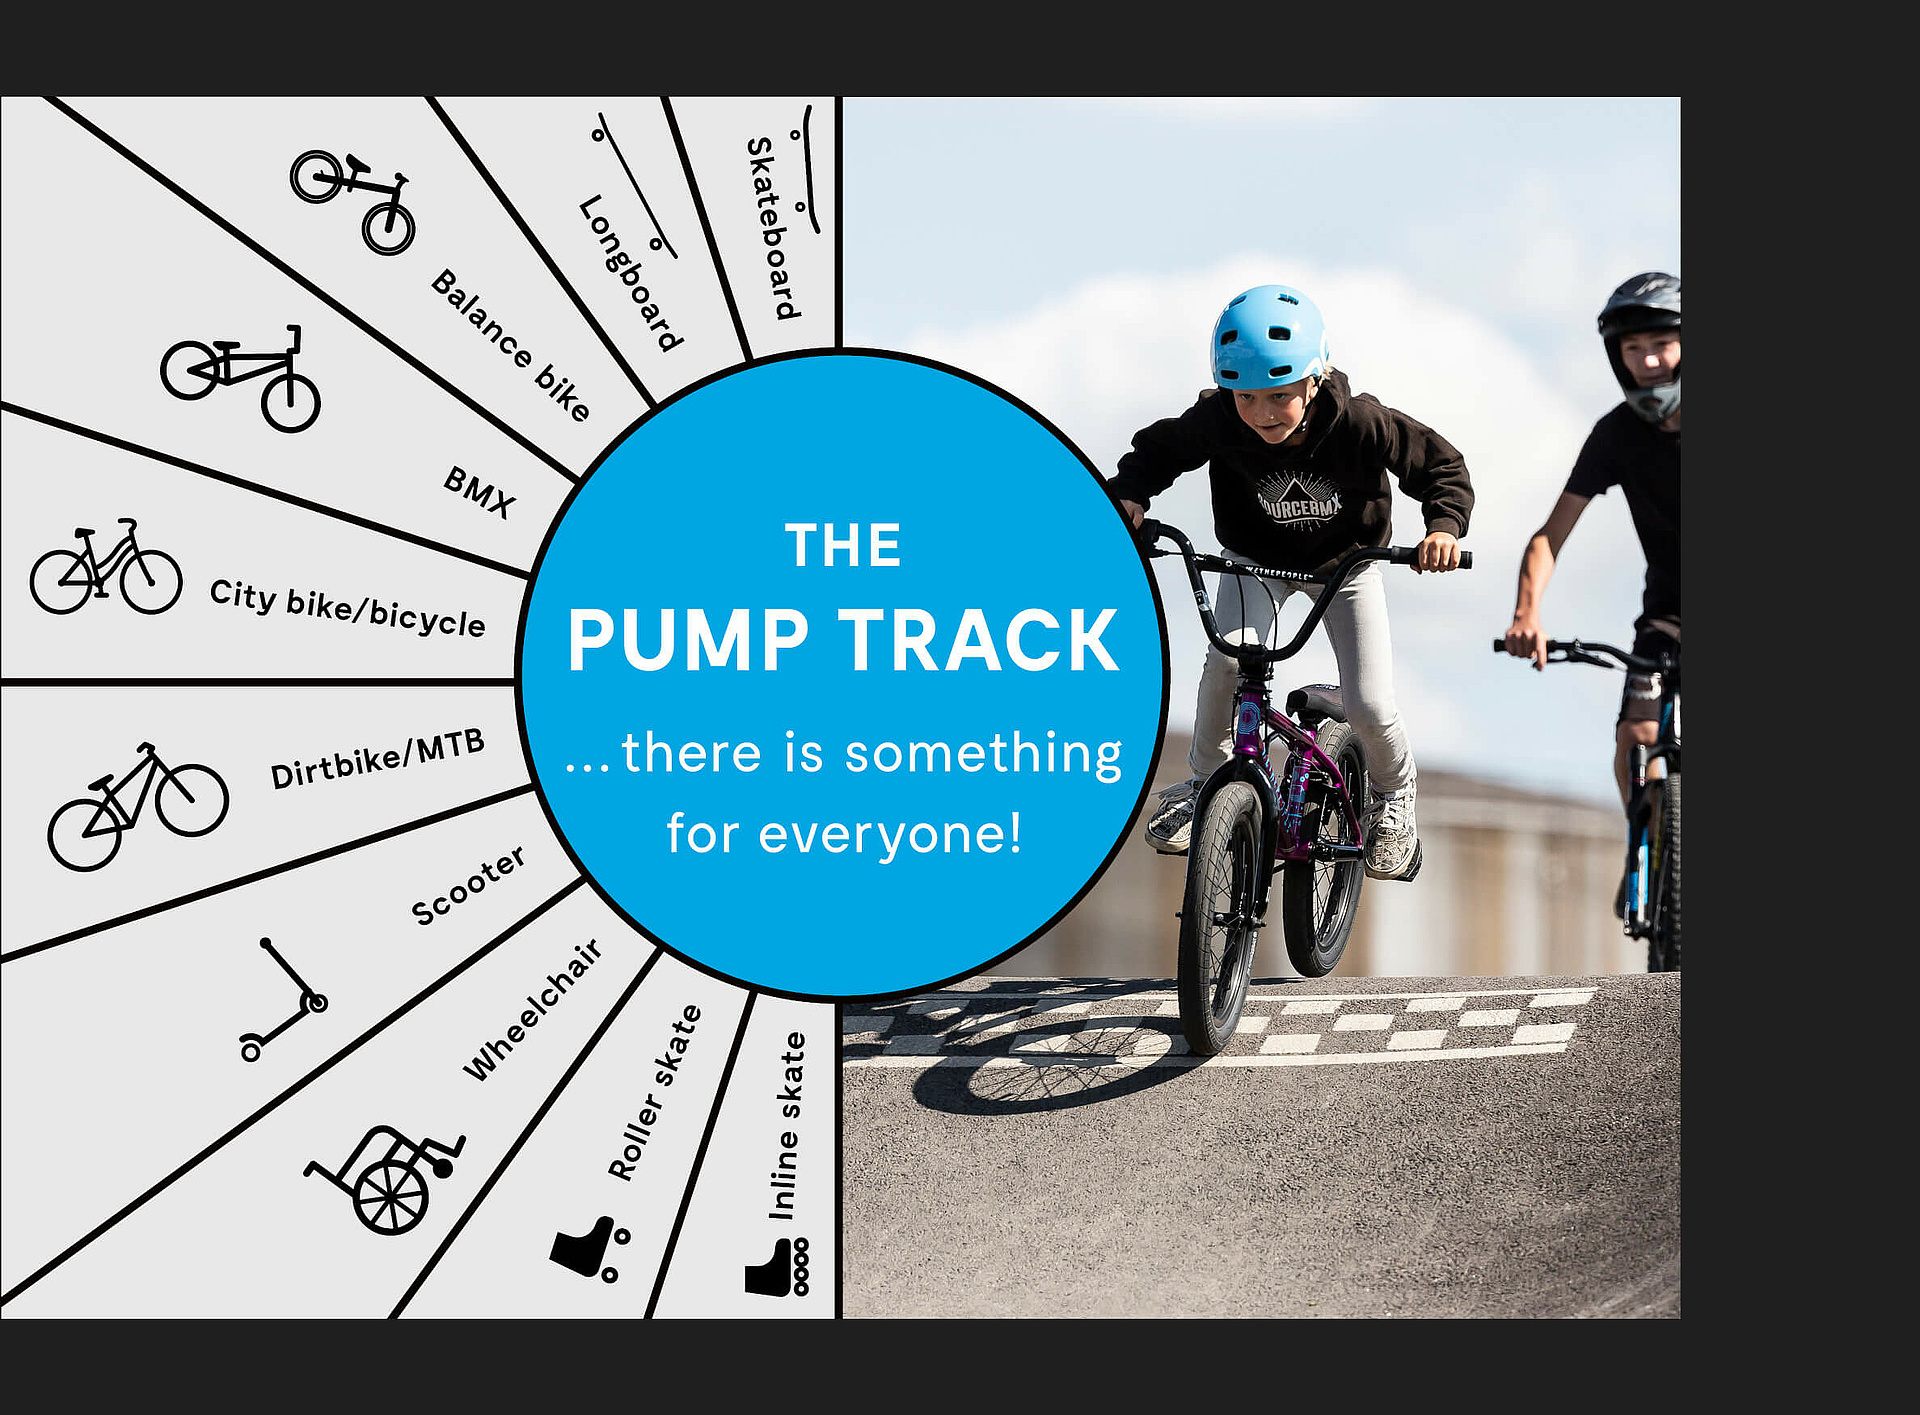 Graphic that shows what sports equipment can be used in a pump track